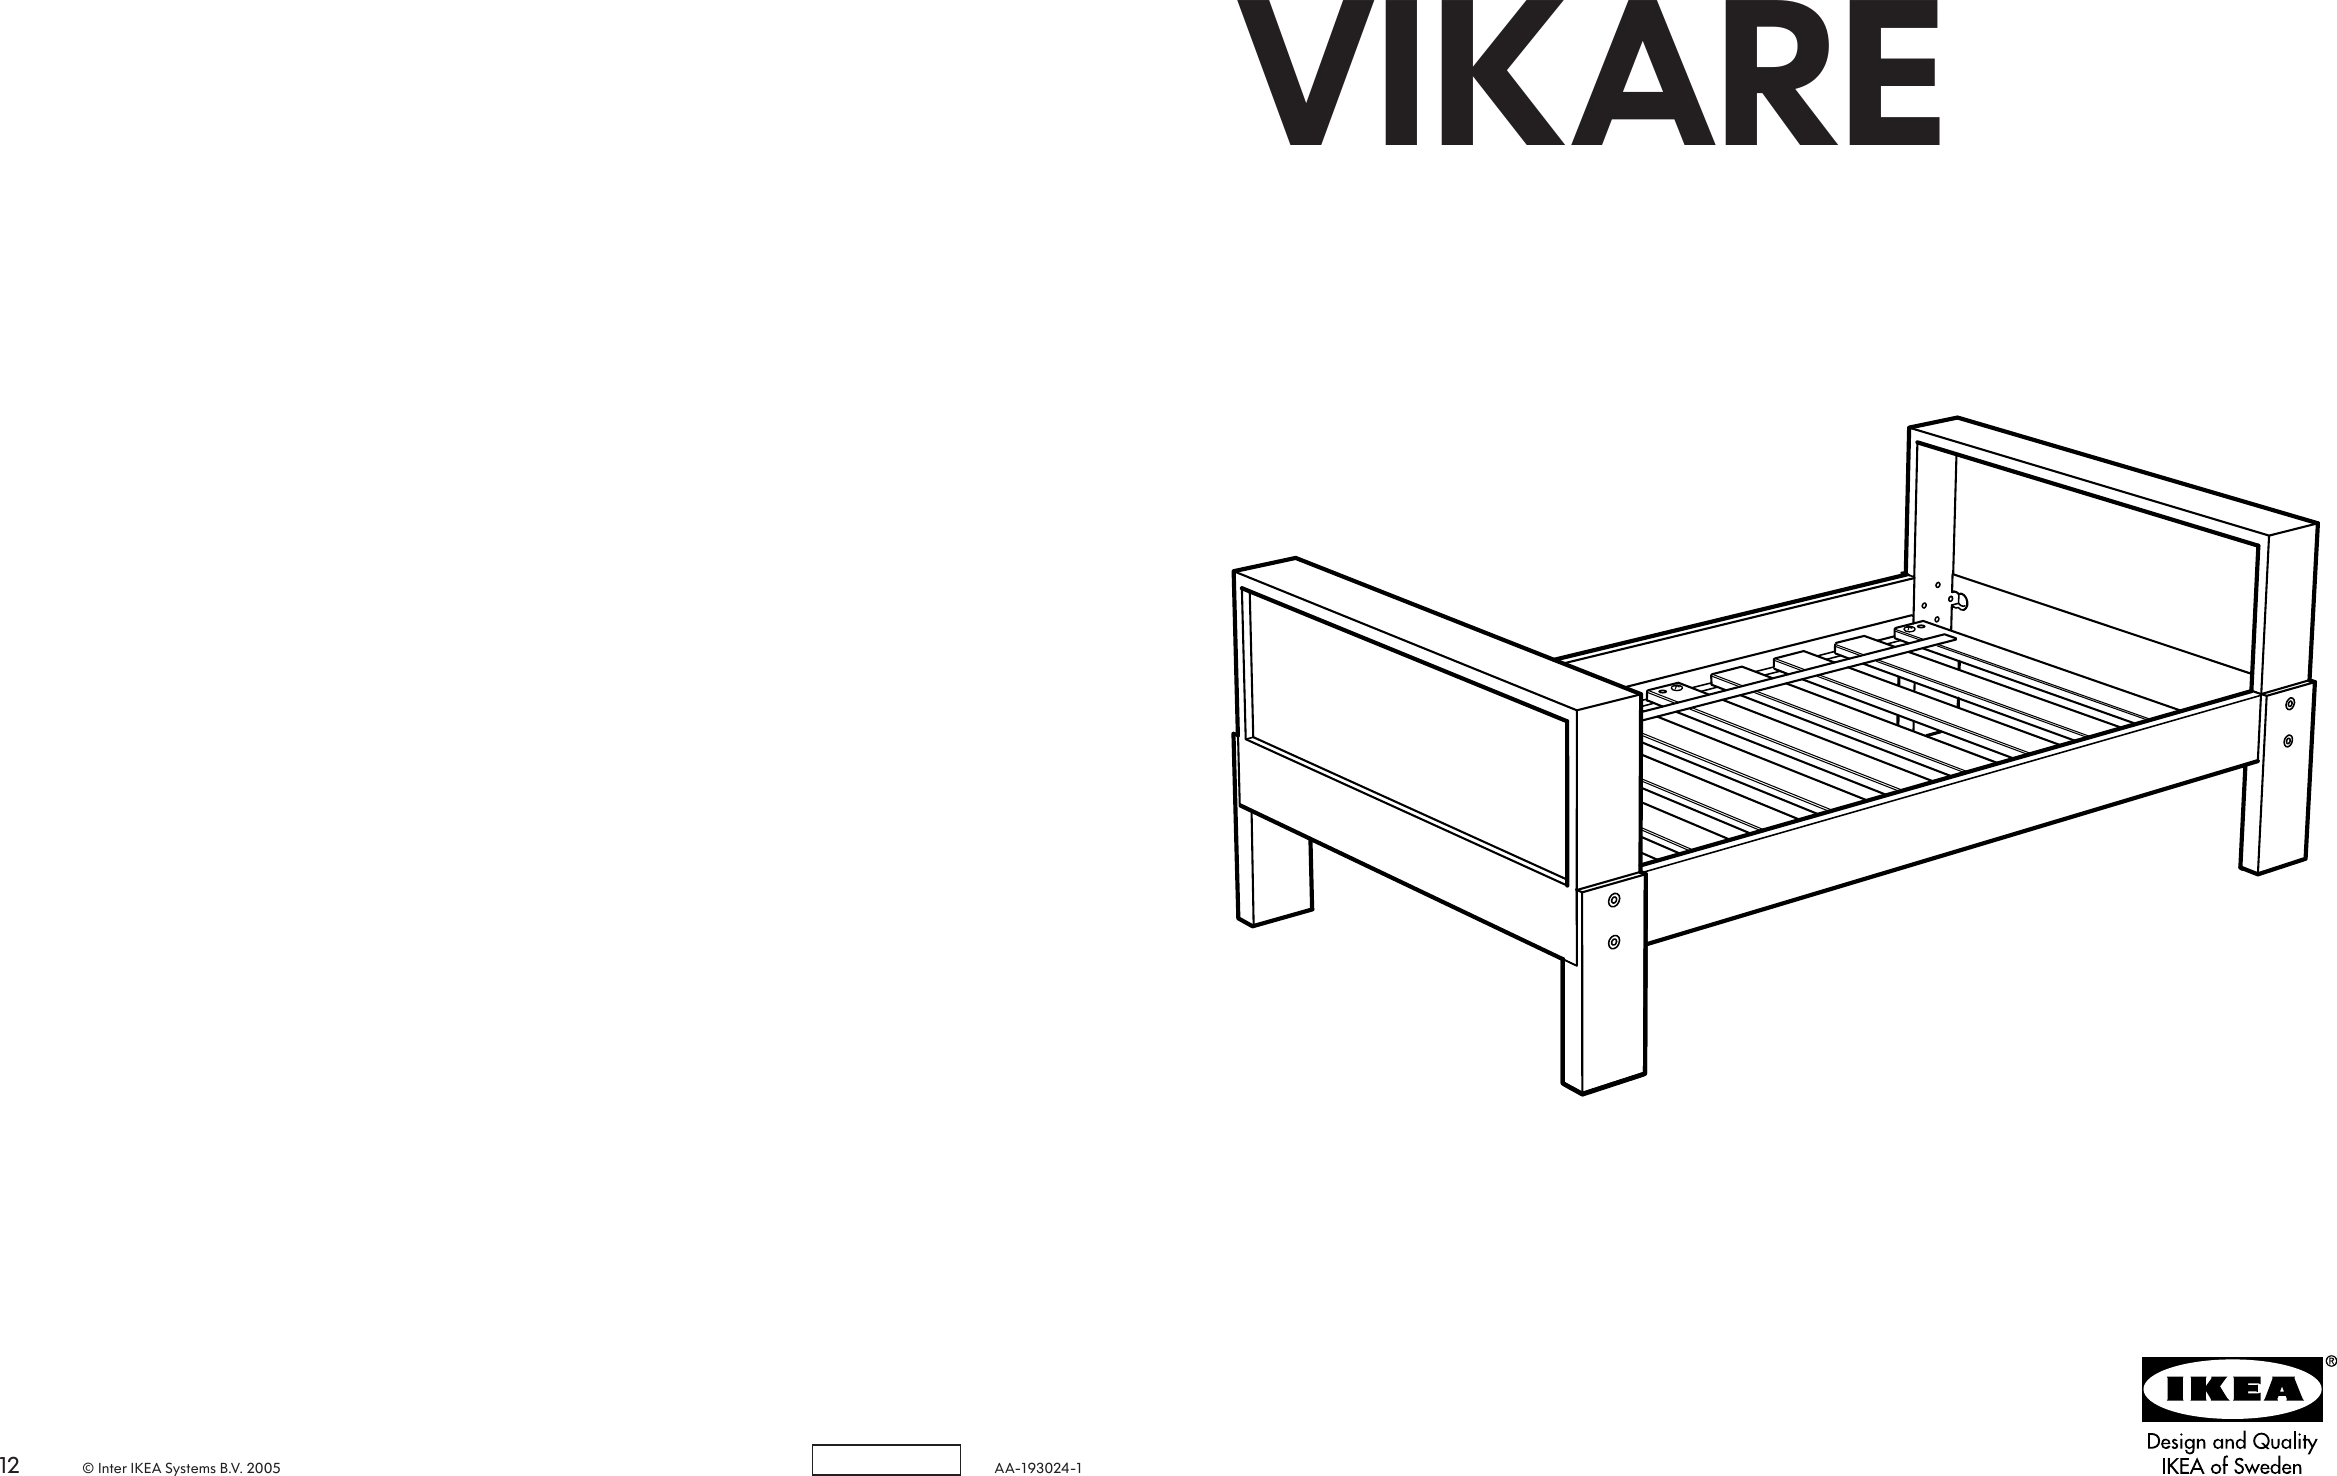 Page 1 of 6 - Ikea Ikea-Vikare-Extendable-Bed-Frame-Assembly-Instruction